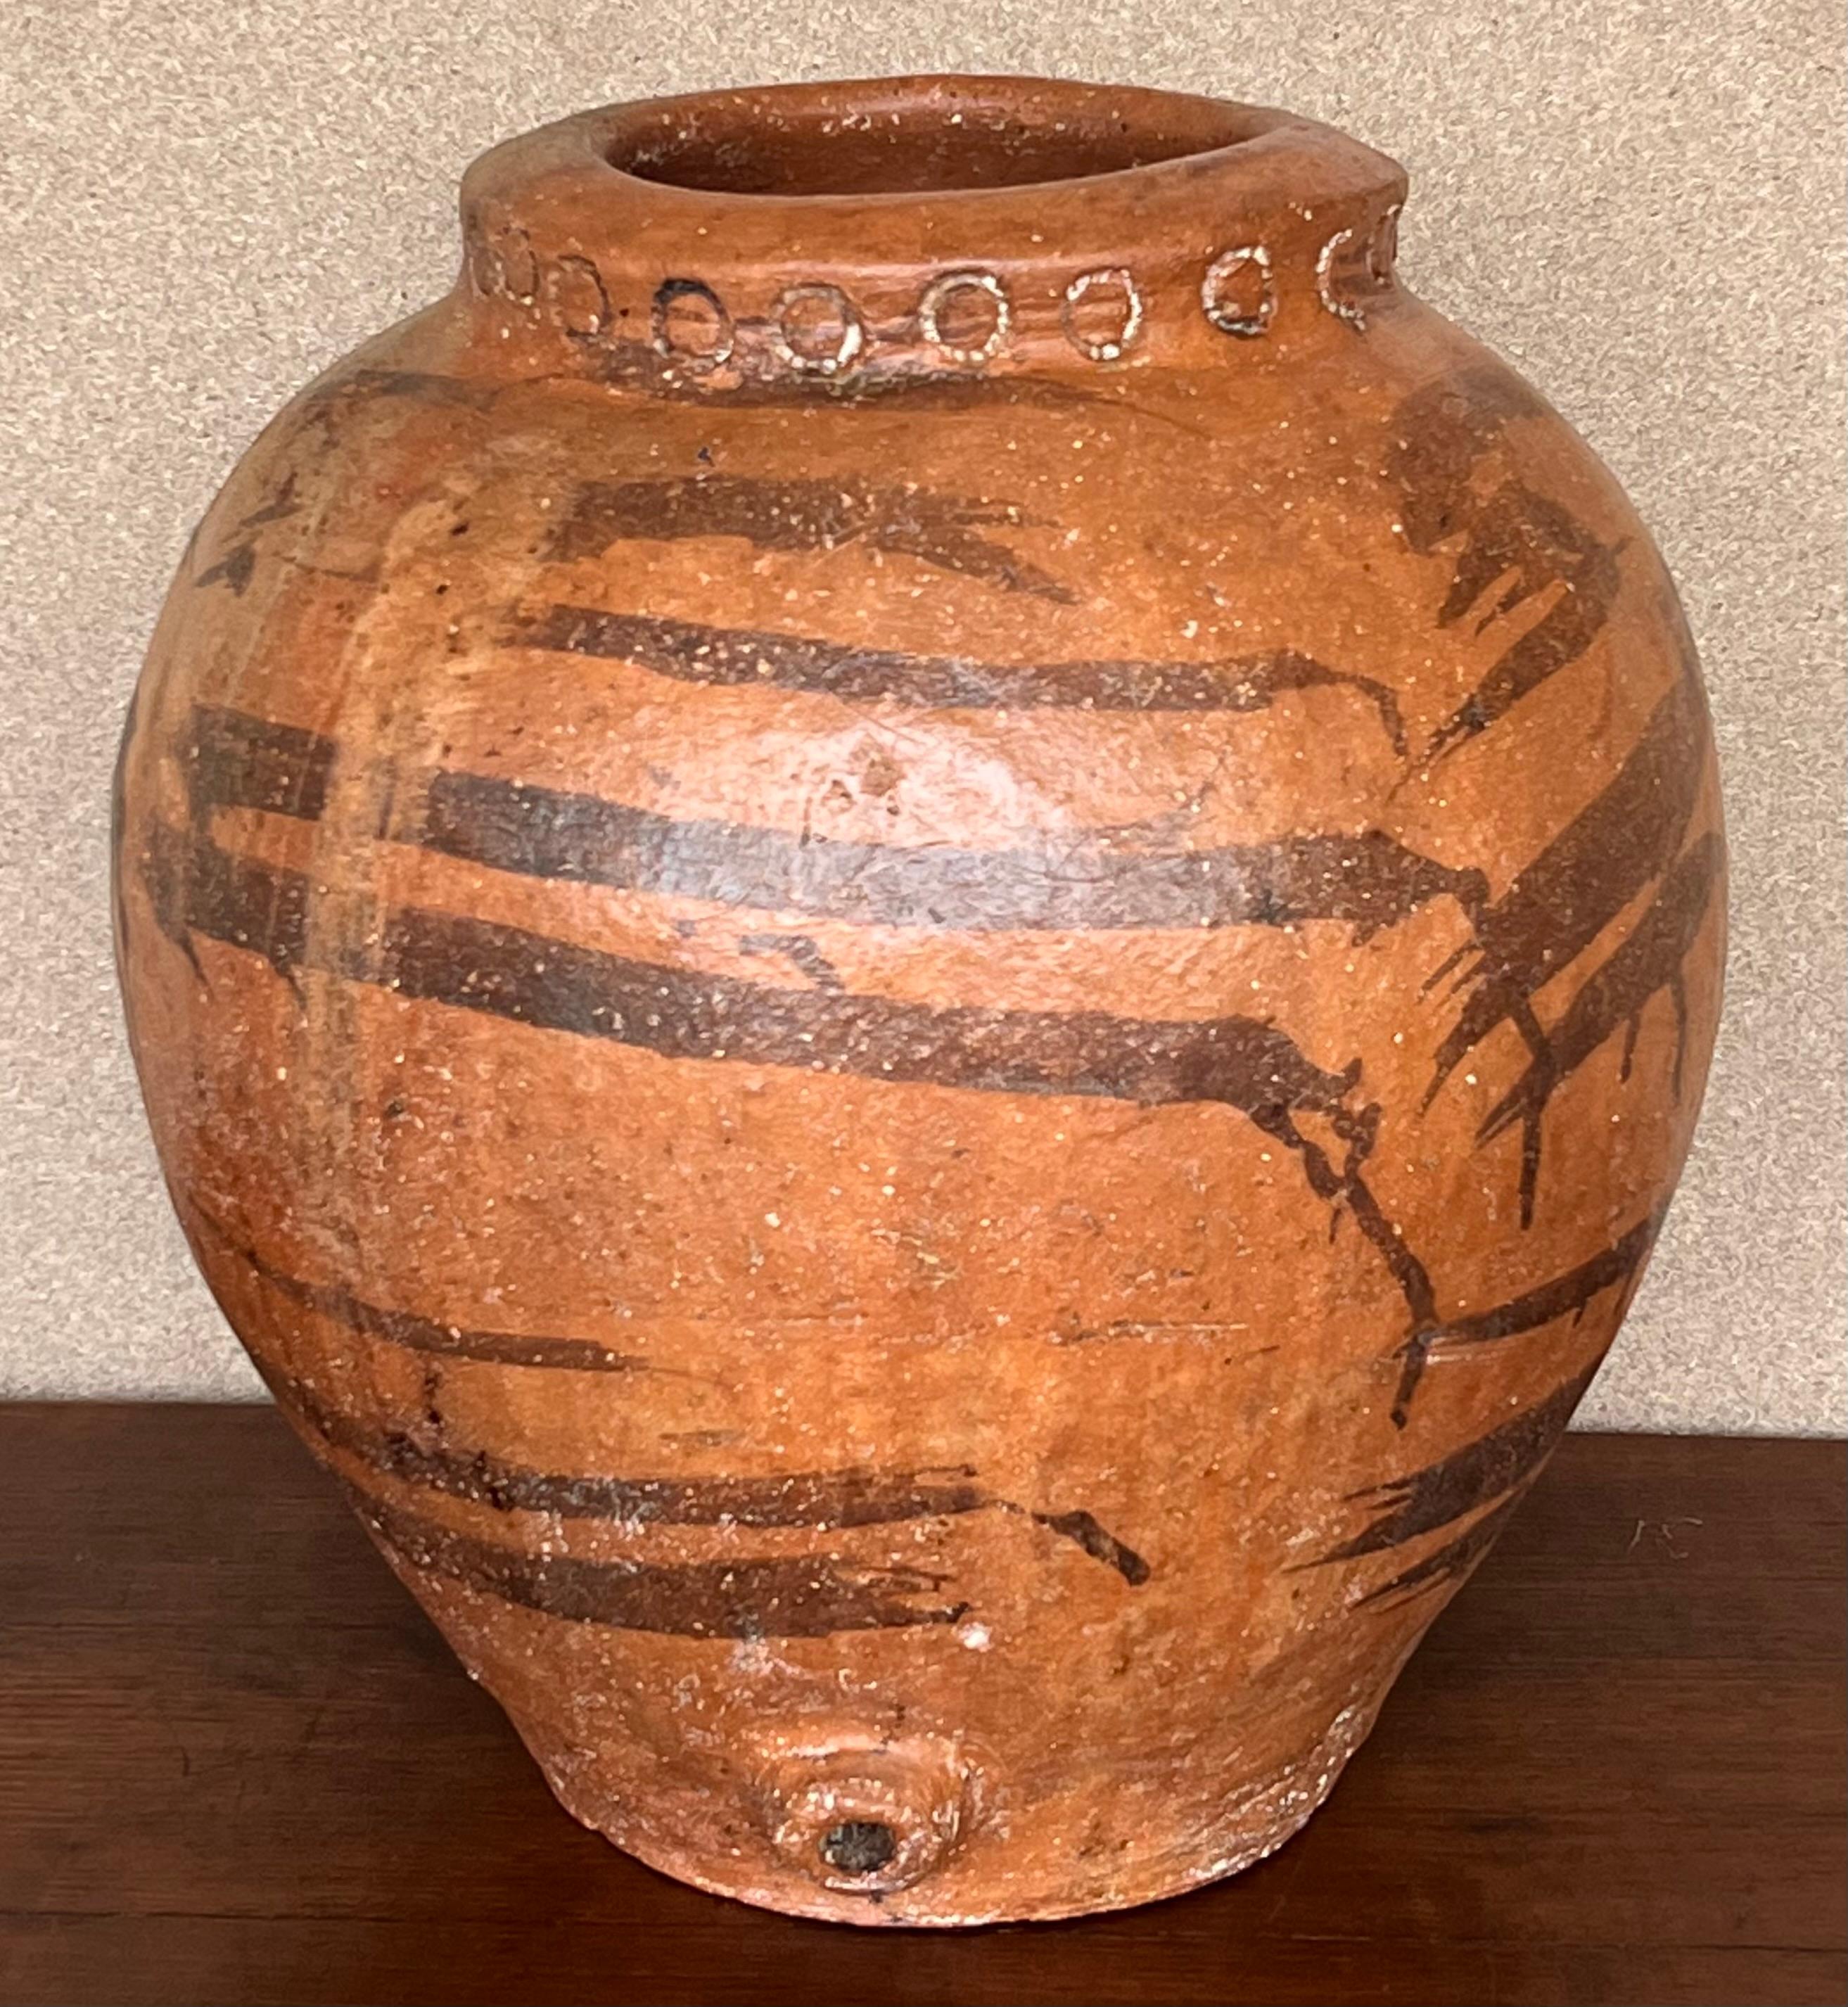 This is a terracotta olive jar from central Spain. It has a wonderful aged patina with chalky painted finish. It makes a great statement as a sculpture in a room on a pedestal, alone or with a plant. Stamped on the pot and two handmande